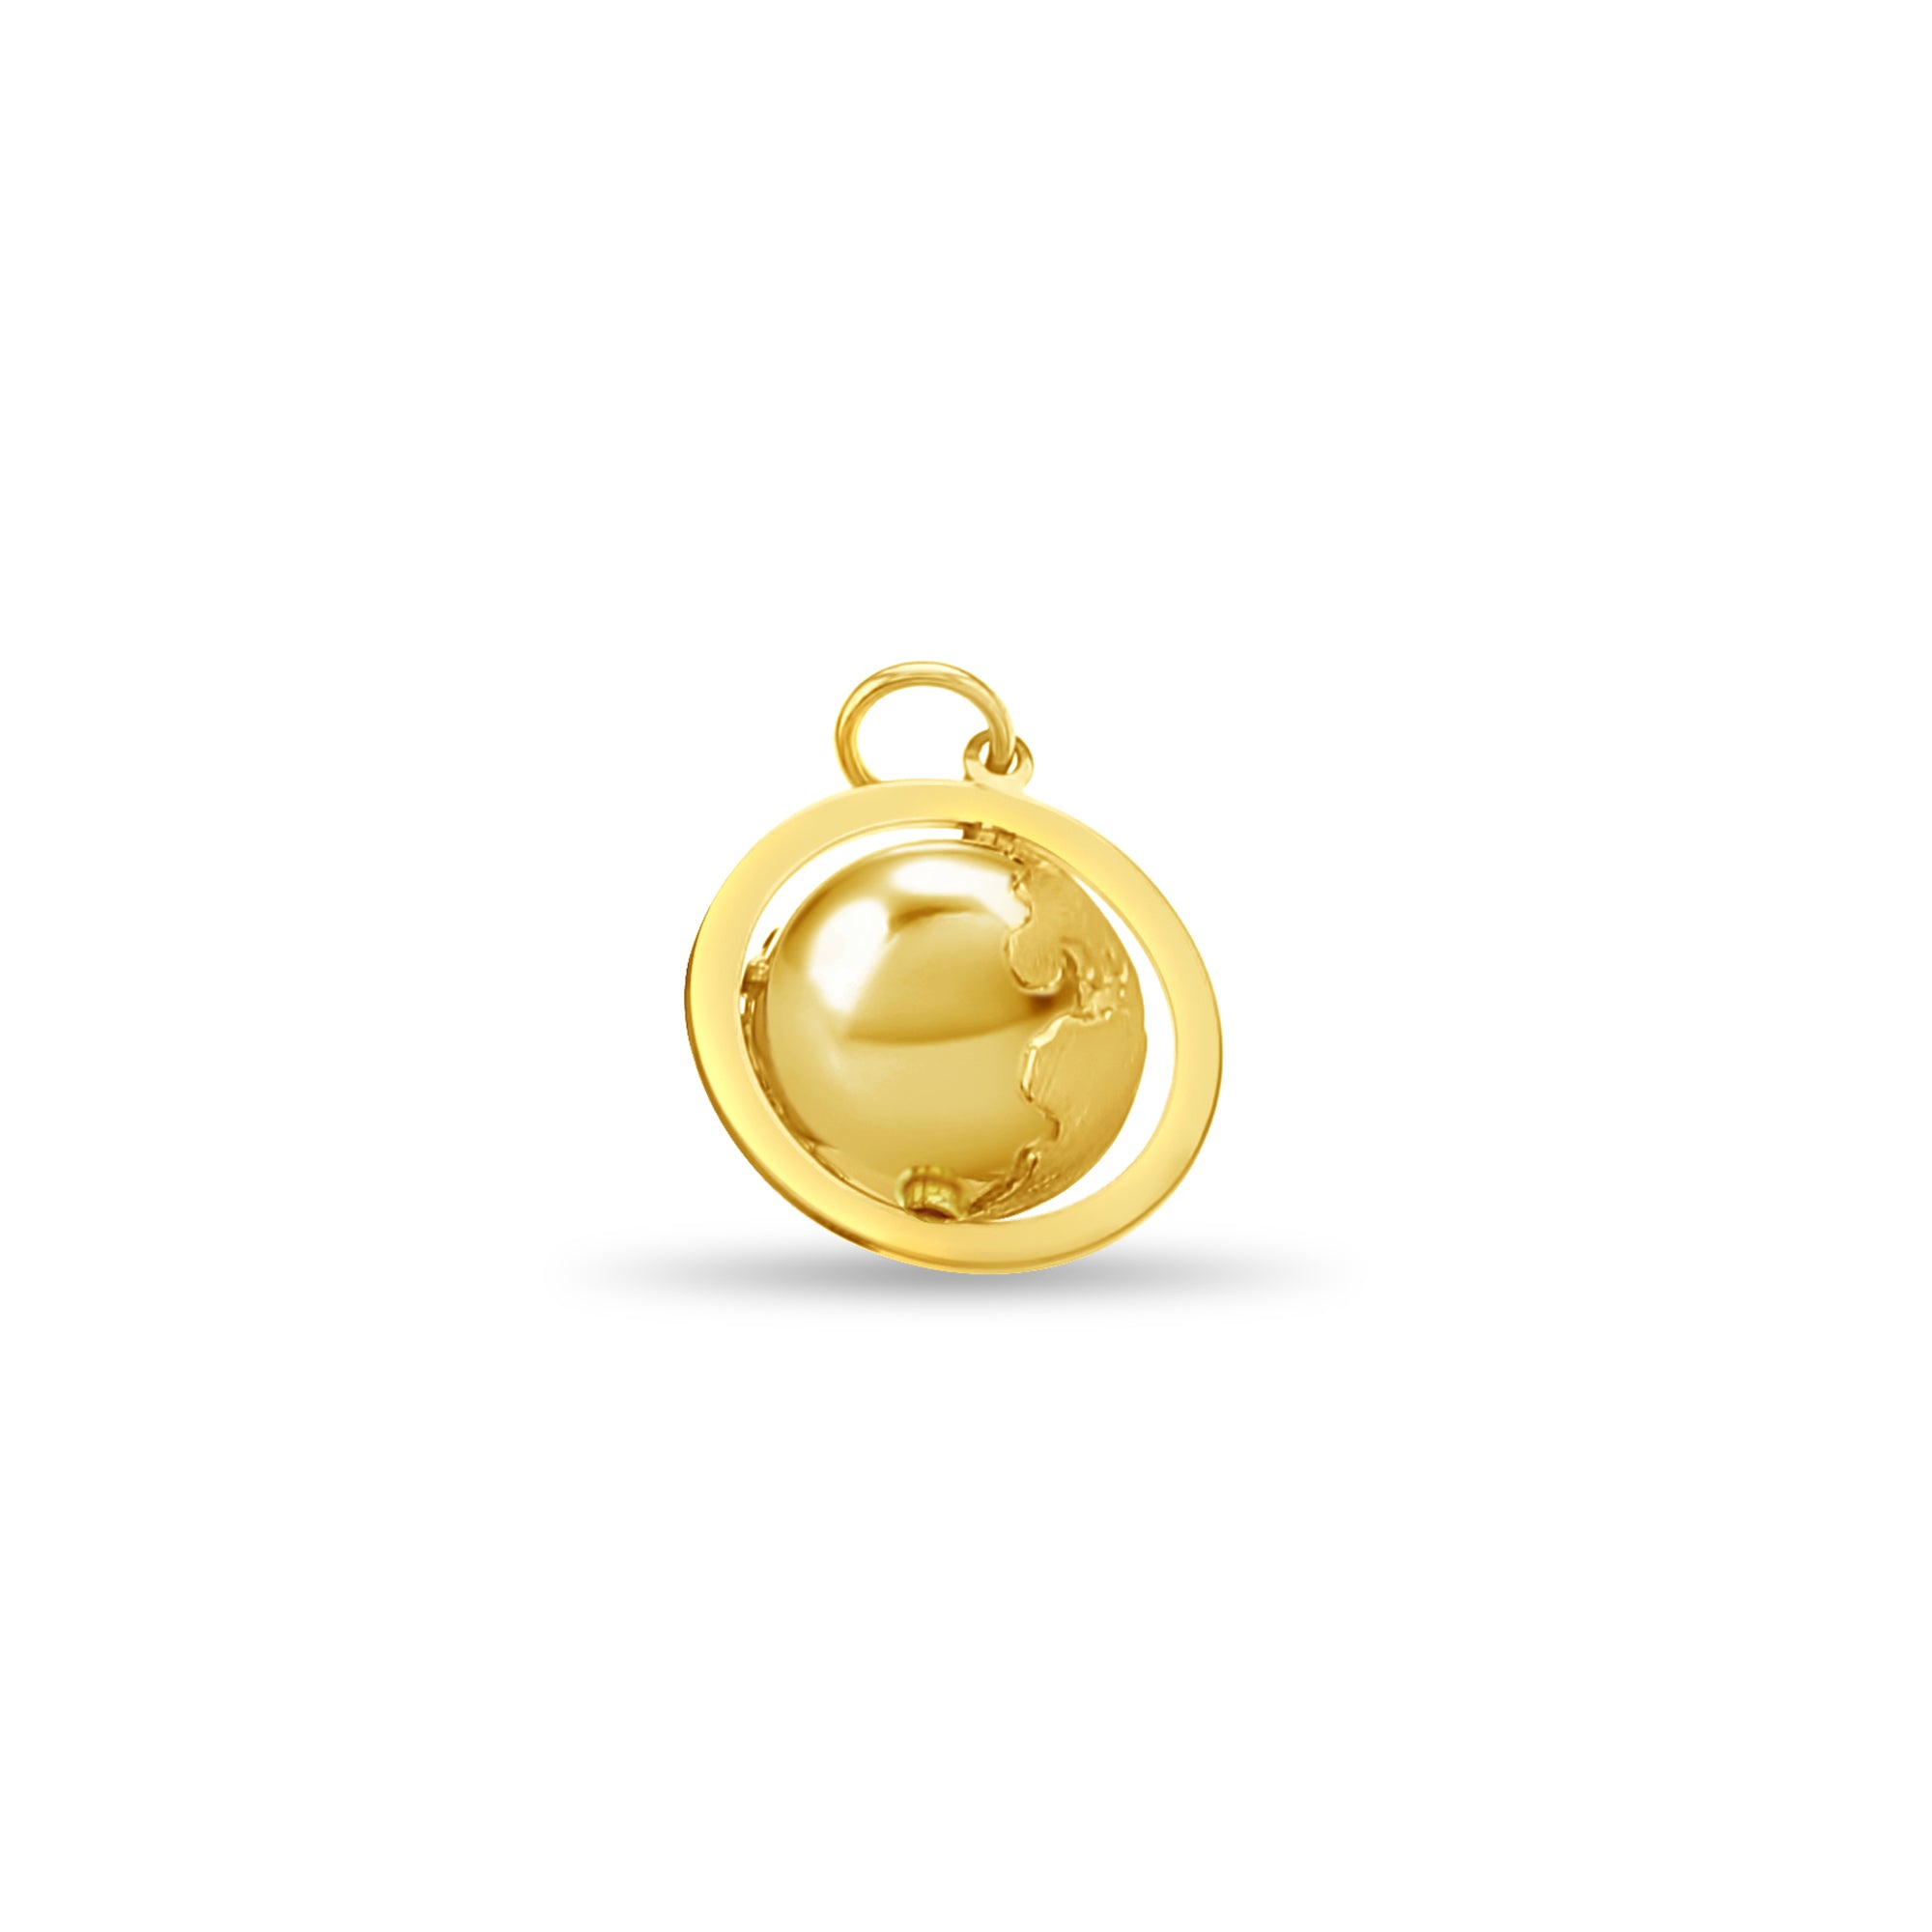 Necklace Charm In Golden Globe | Saule Label | Wolf & Badger